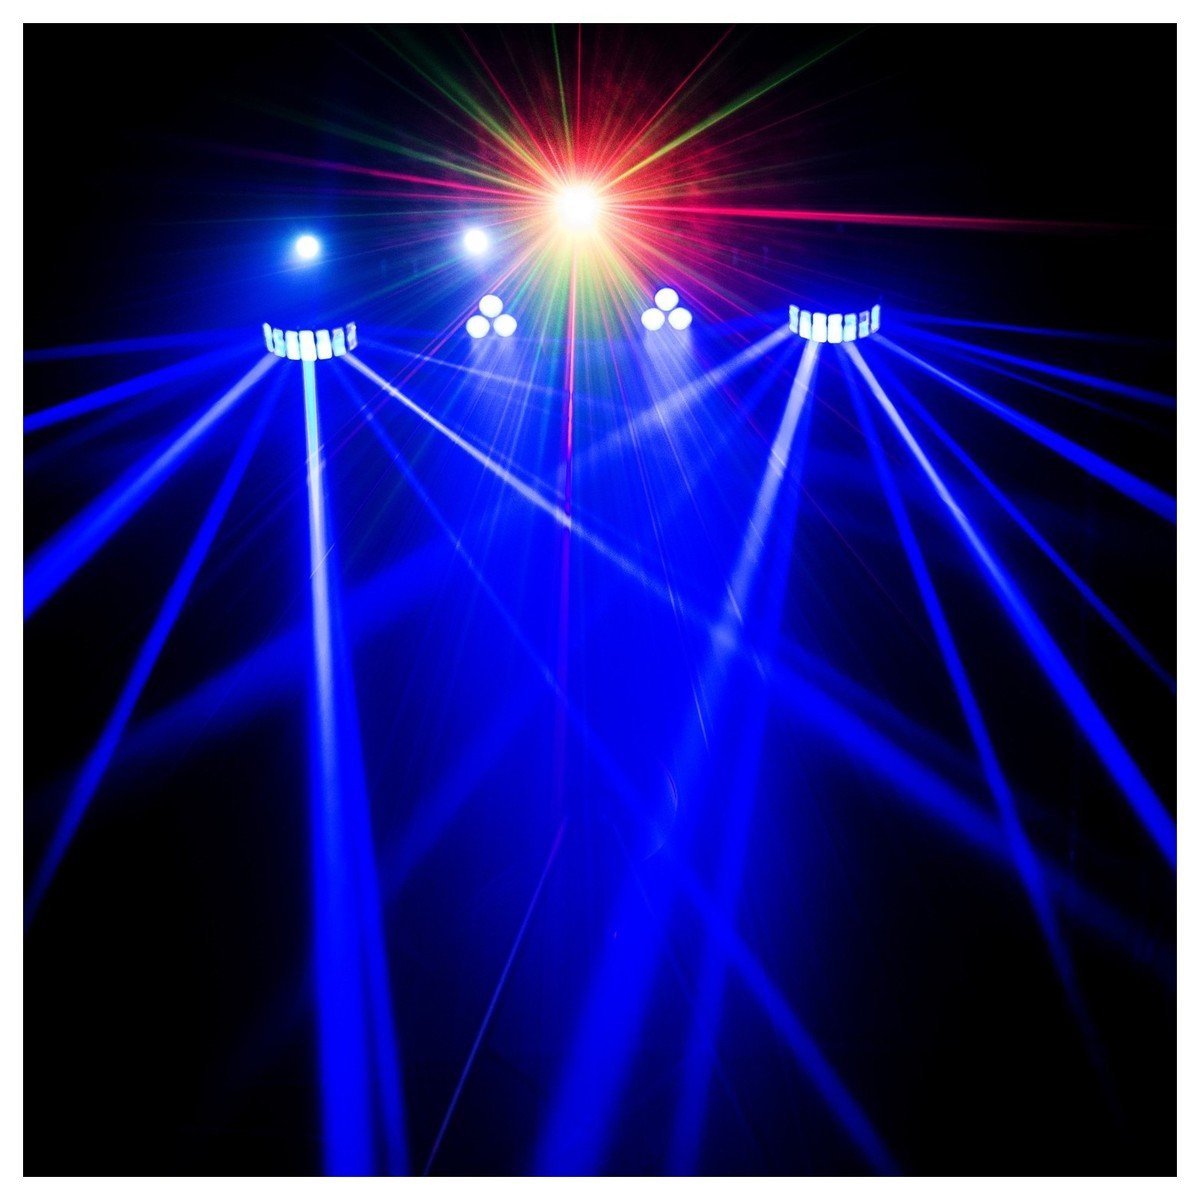 Chauvet Gig Bar 2 4-in-1 Effect Lighting System - DY Pro Audio